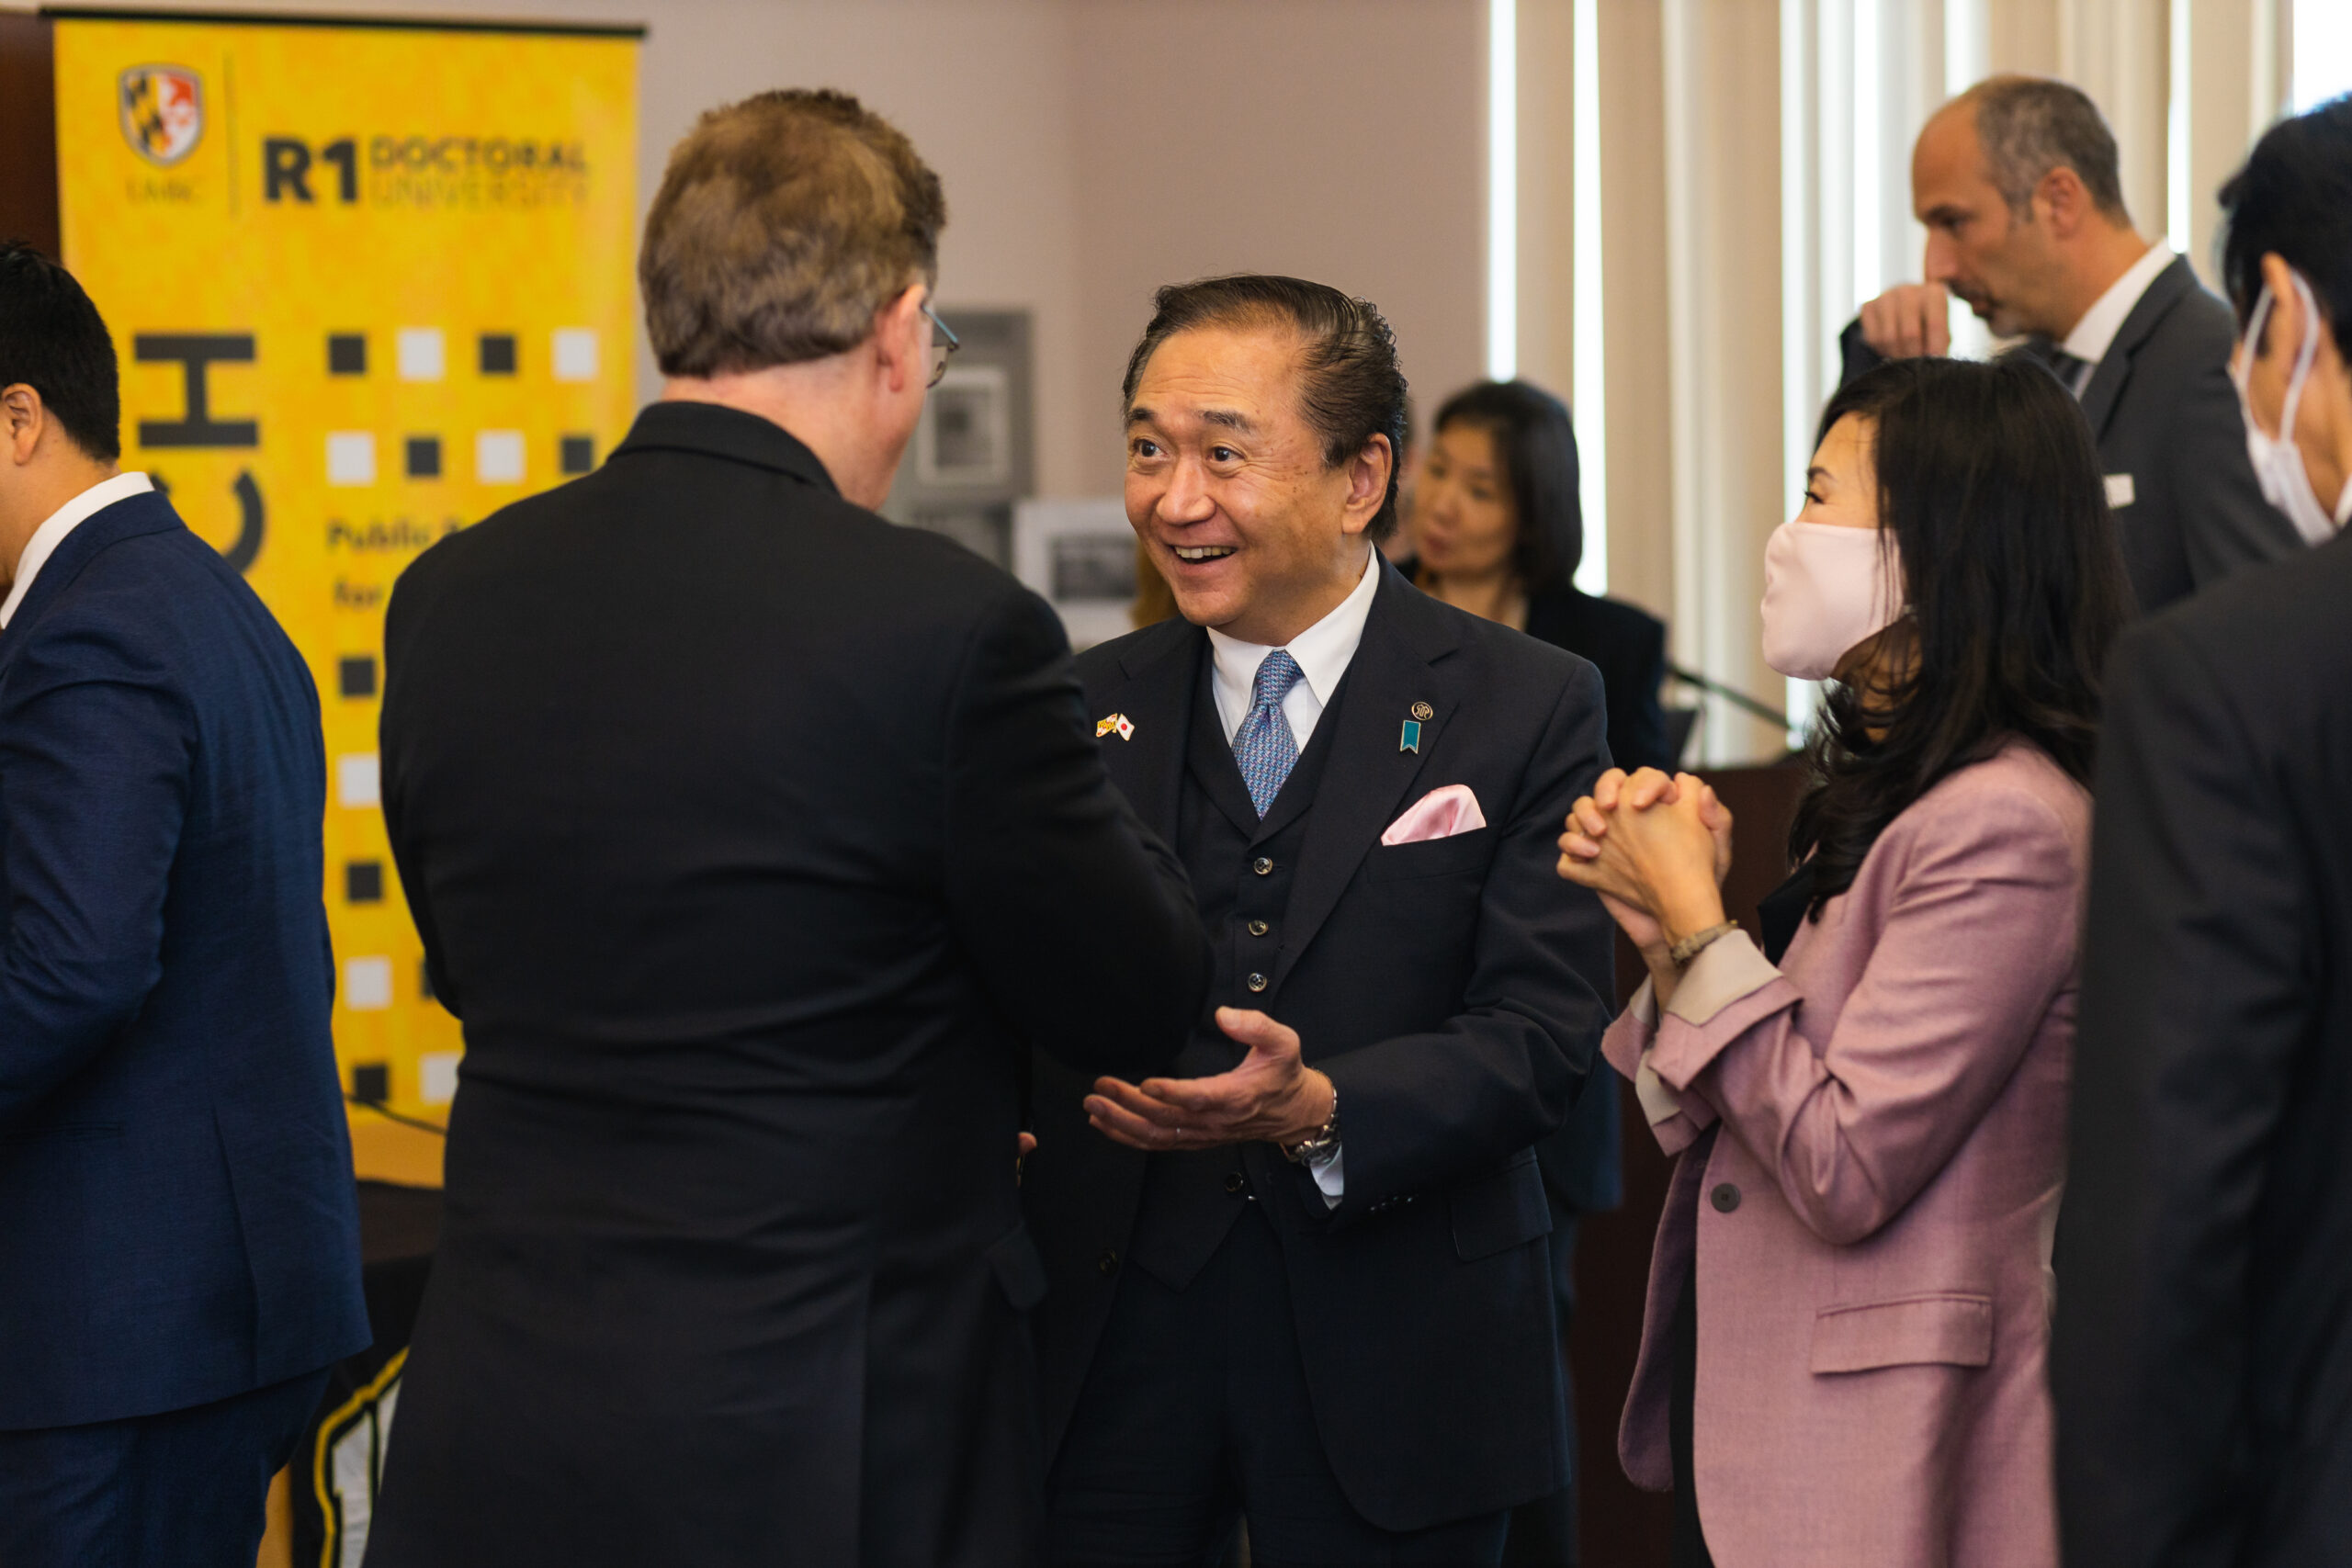 Transforming the future of healthy aging: UMBC event highlights leading practices, research from Kanagawa and Maryland